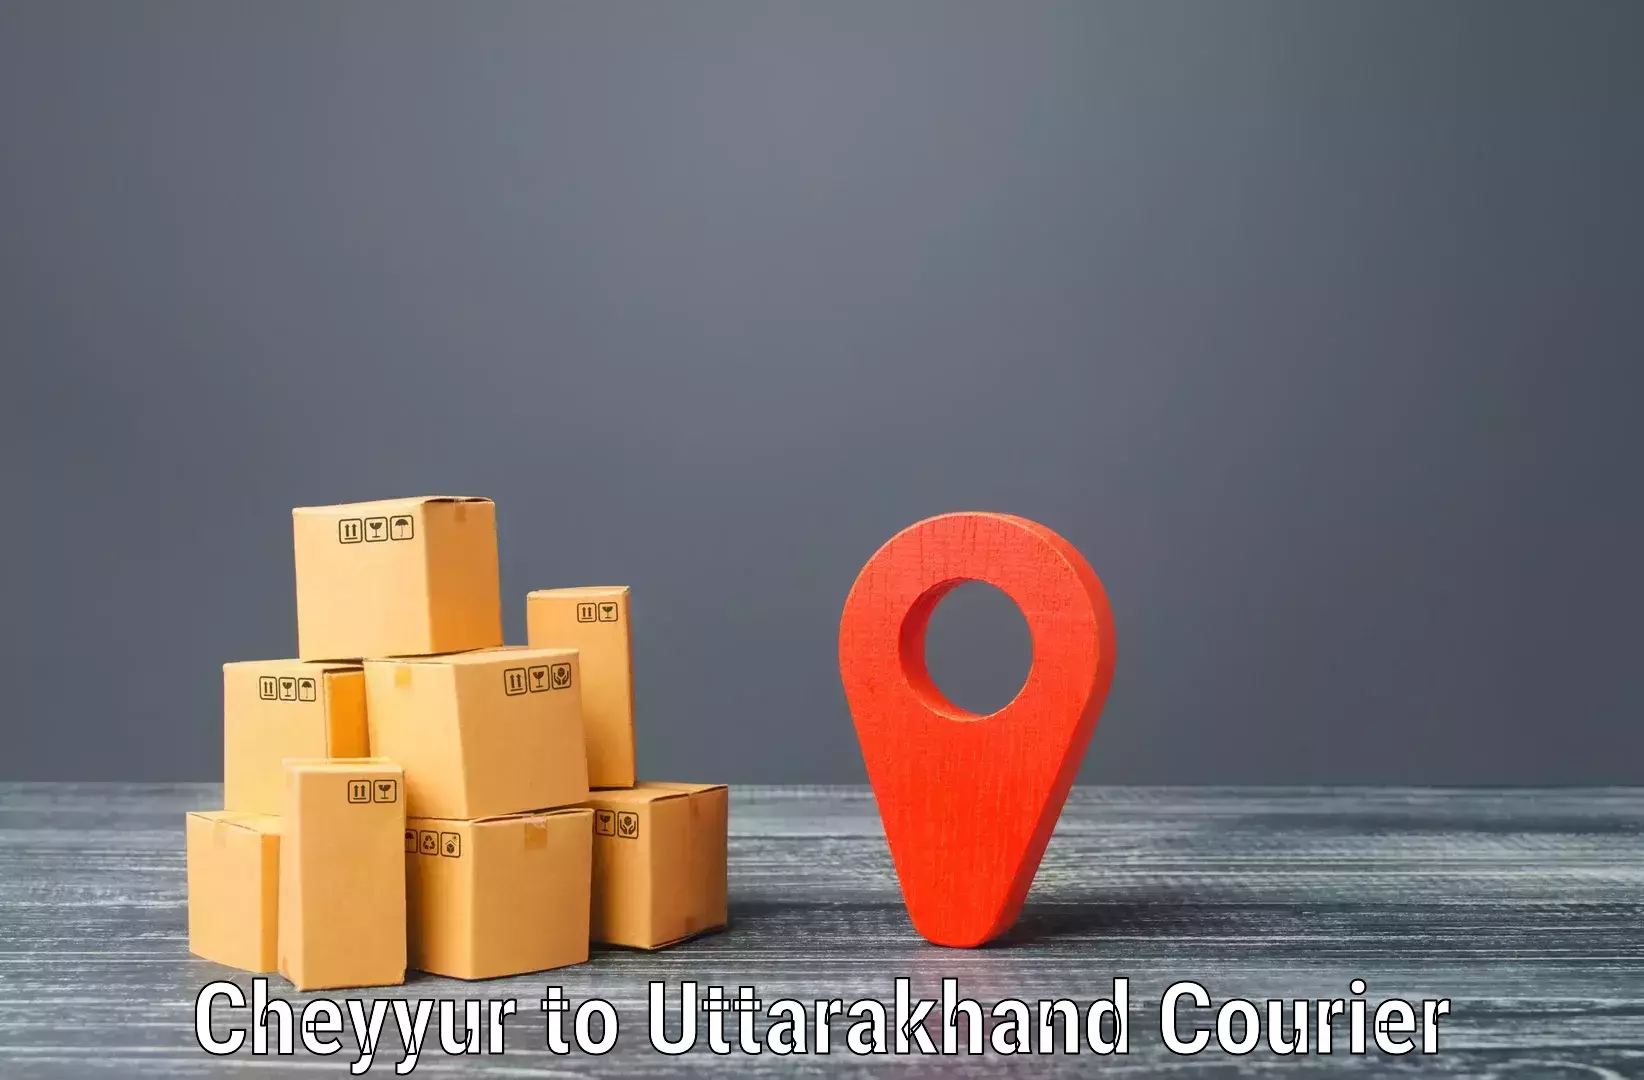 Courier service comparison Cheyyur to IIT Roorkee